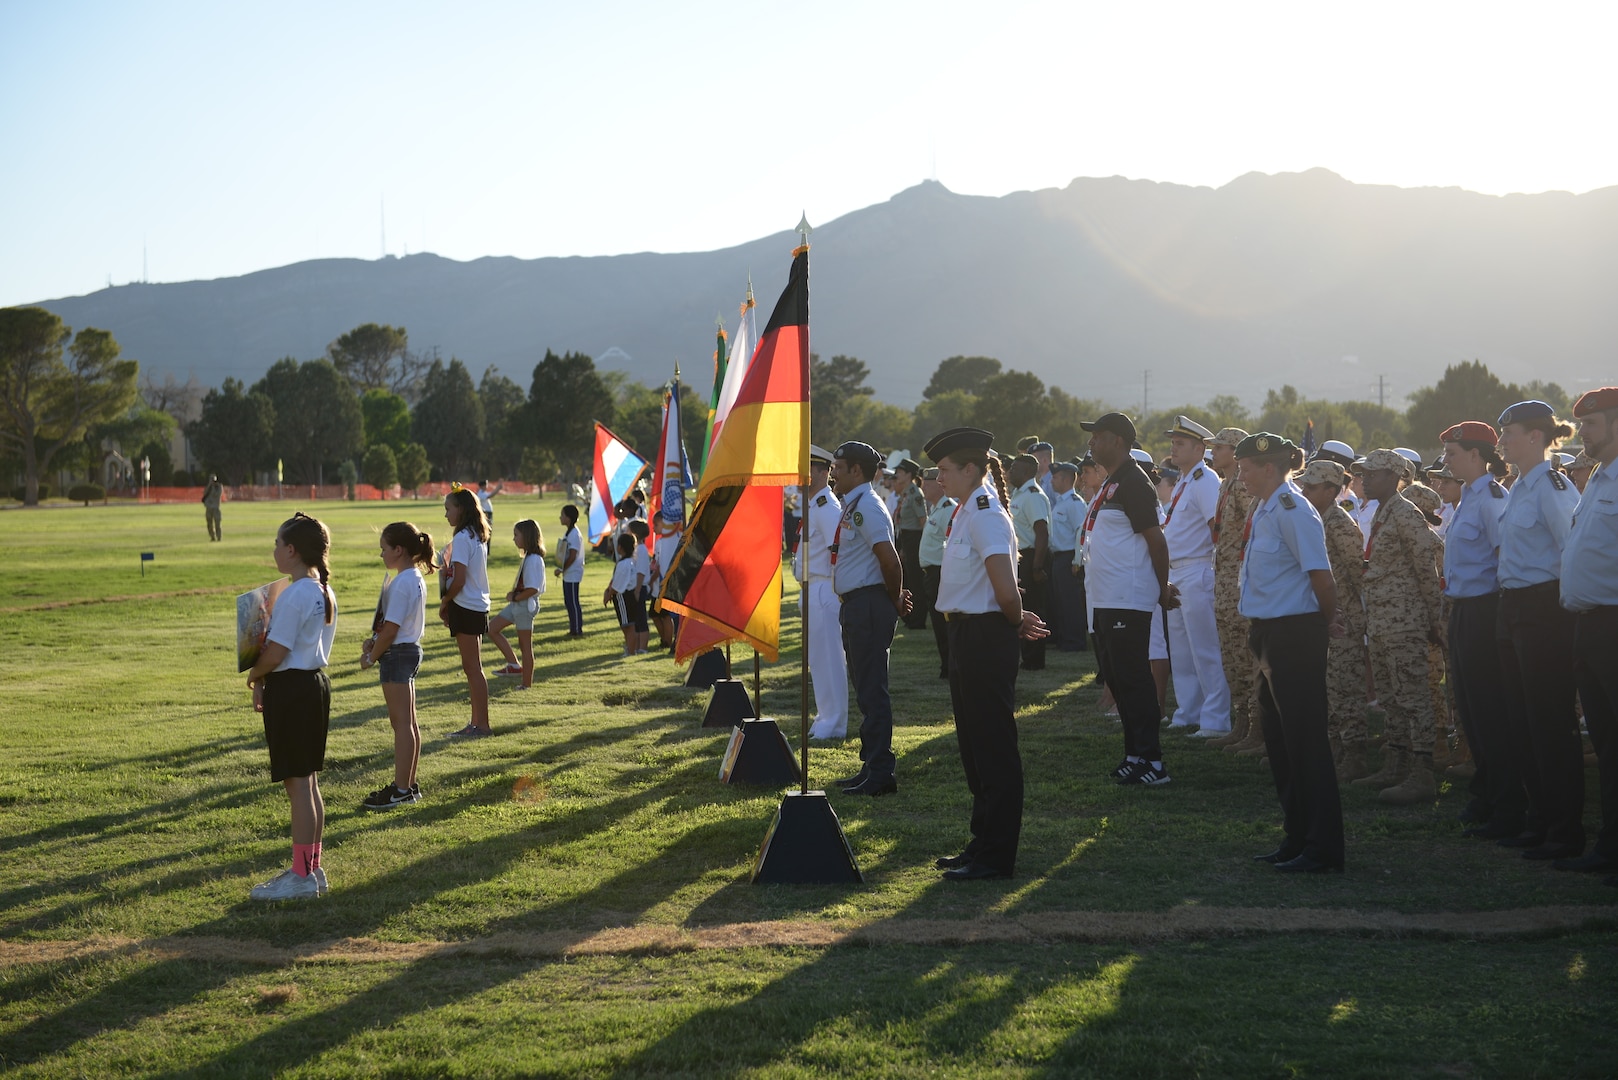 Elite military soccer players from around the world participate in the opening ceremonies at Fort Bliss June 21 ahead of the 2018 Conseil International du Sport Militaire (CISM) World Military Women's Football Championship. International military teams are here to crown the bst women soccer players among the nine militaries participating.